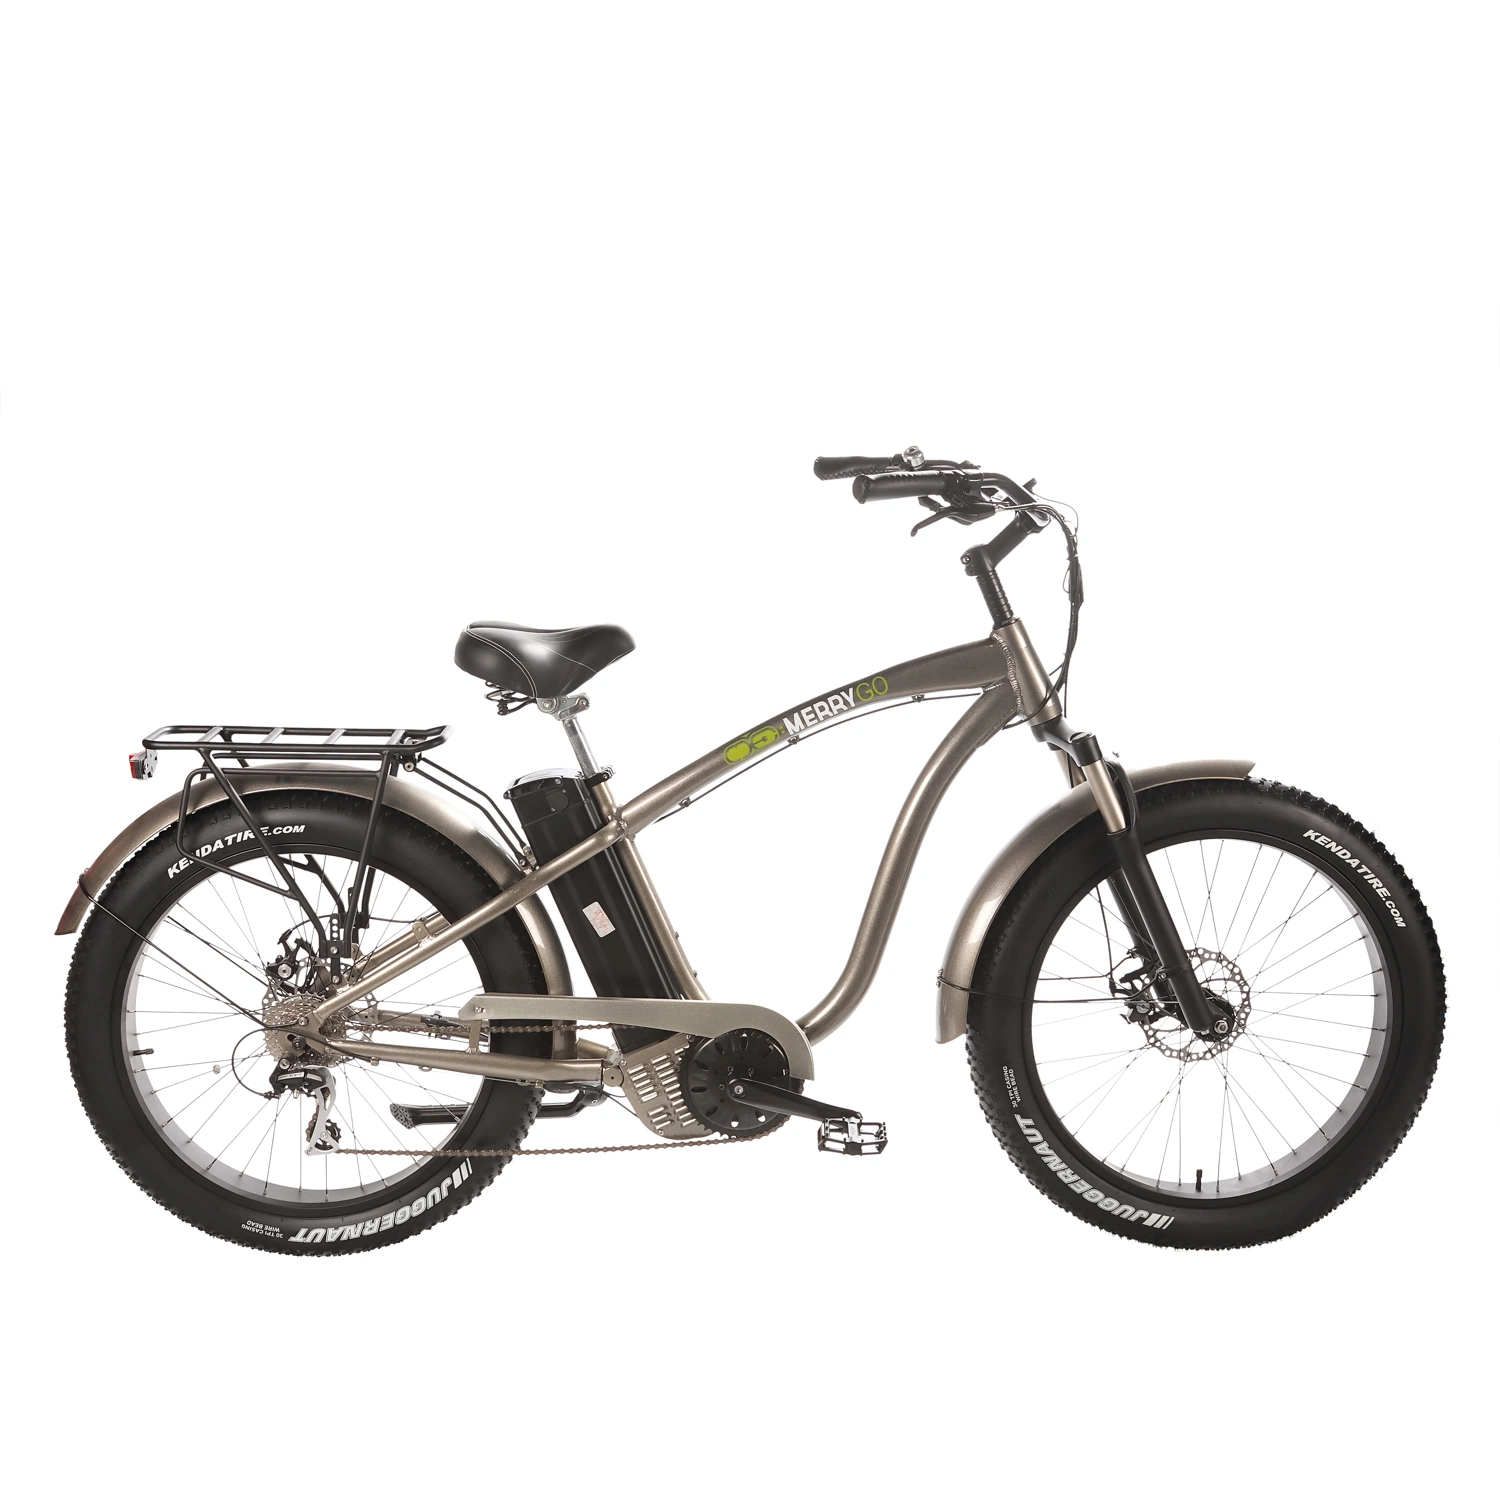 China 750W Fat Tire Electric Bicycle Ebike for Man with Full Suspension